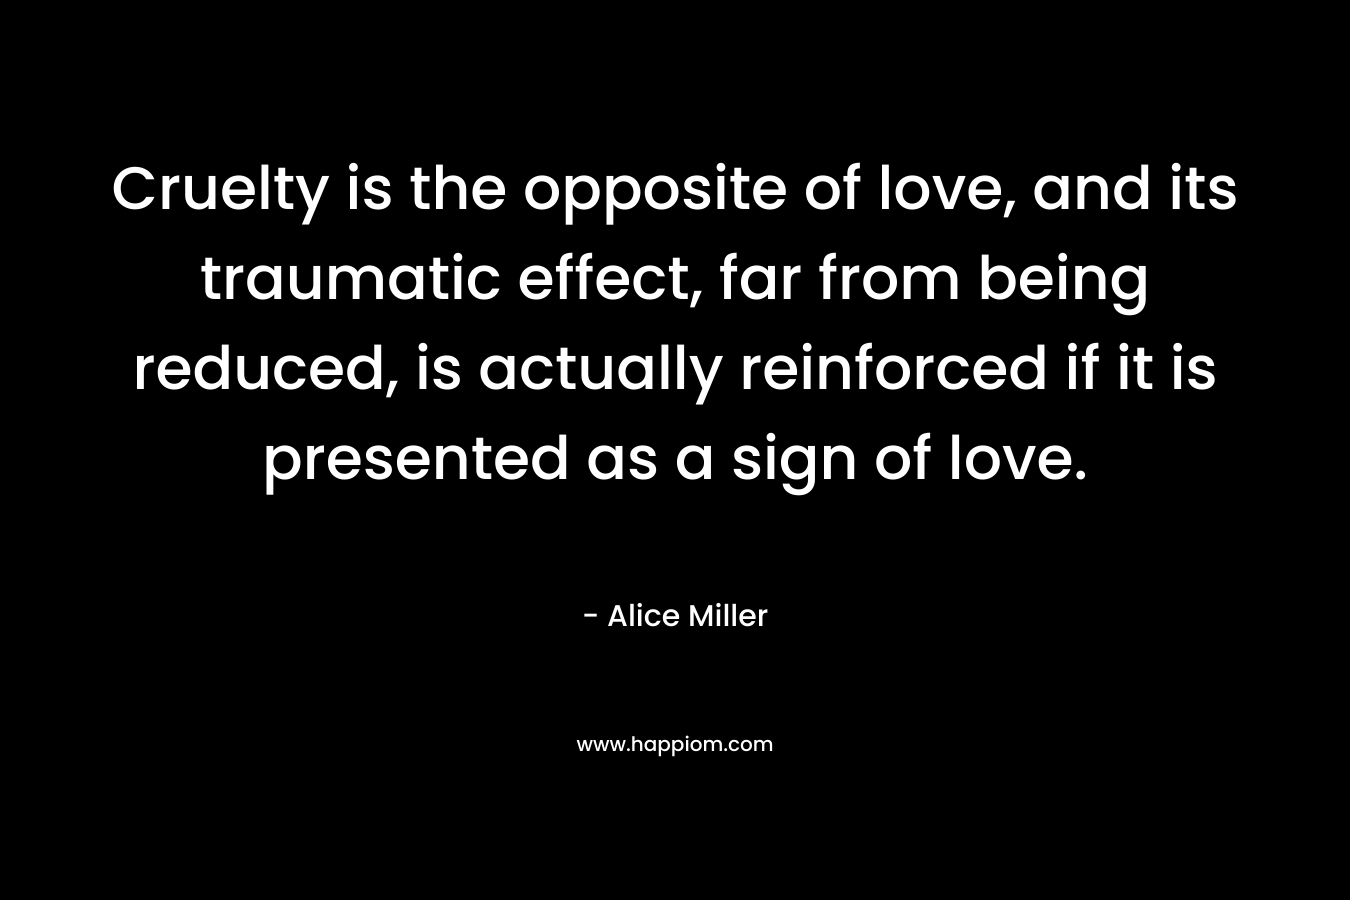 Cruelty is the opposite of love, and its traumatic effect, far from being reduced, is actually reinforced if it is presented as a sign of love.